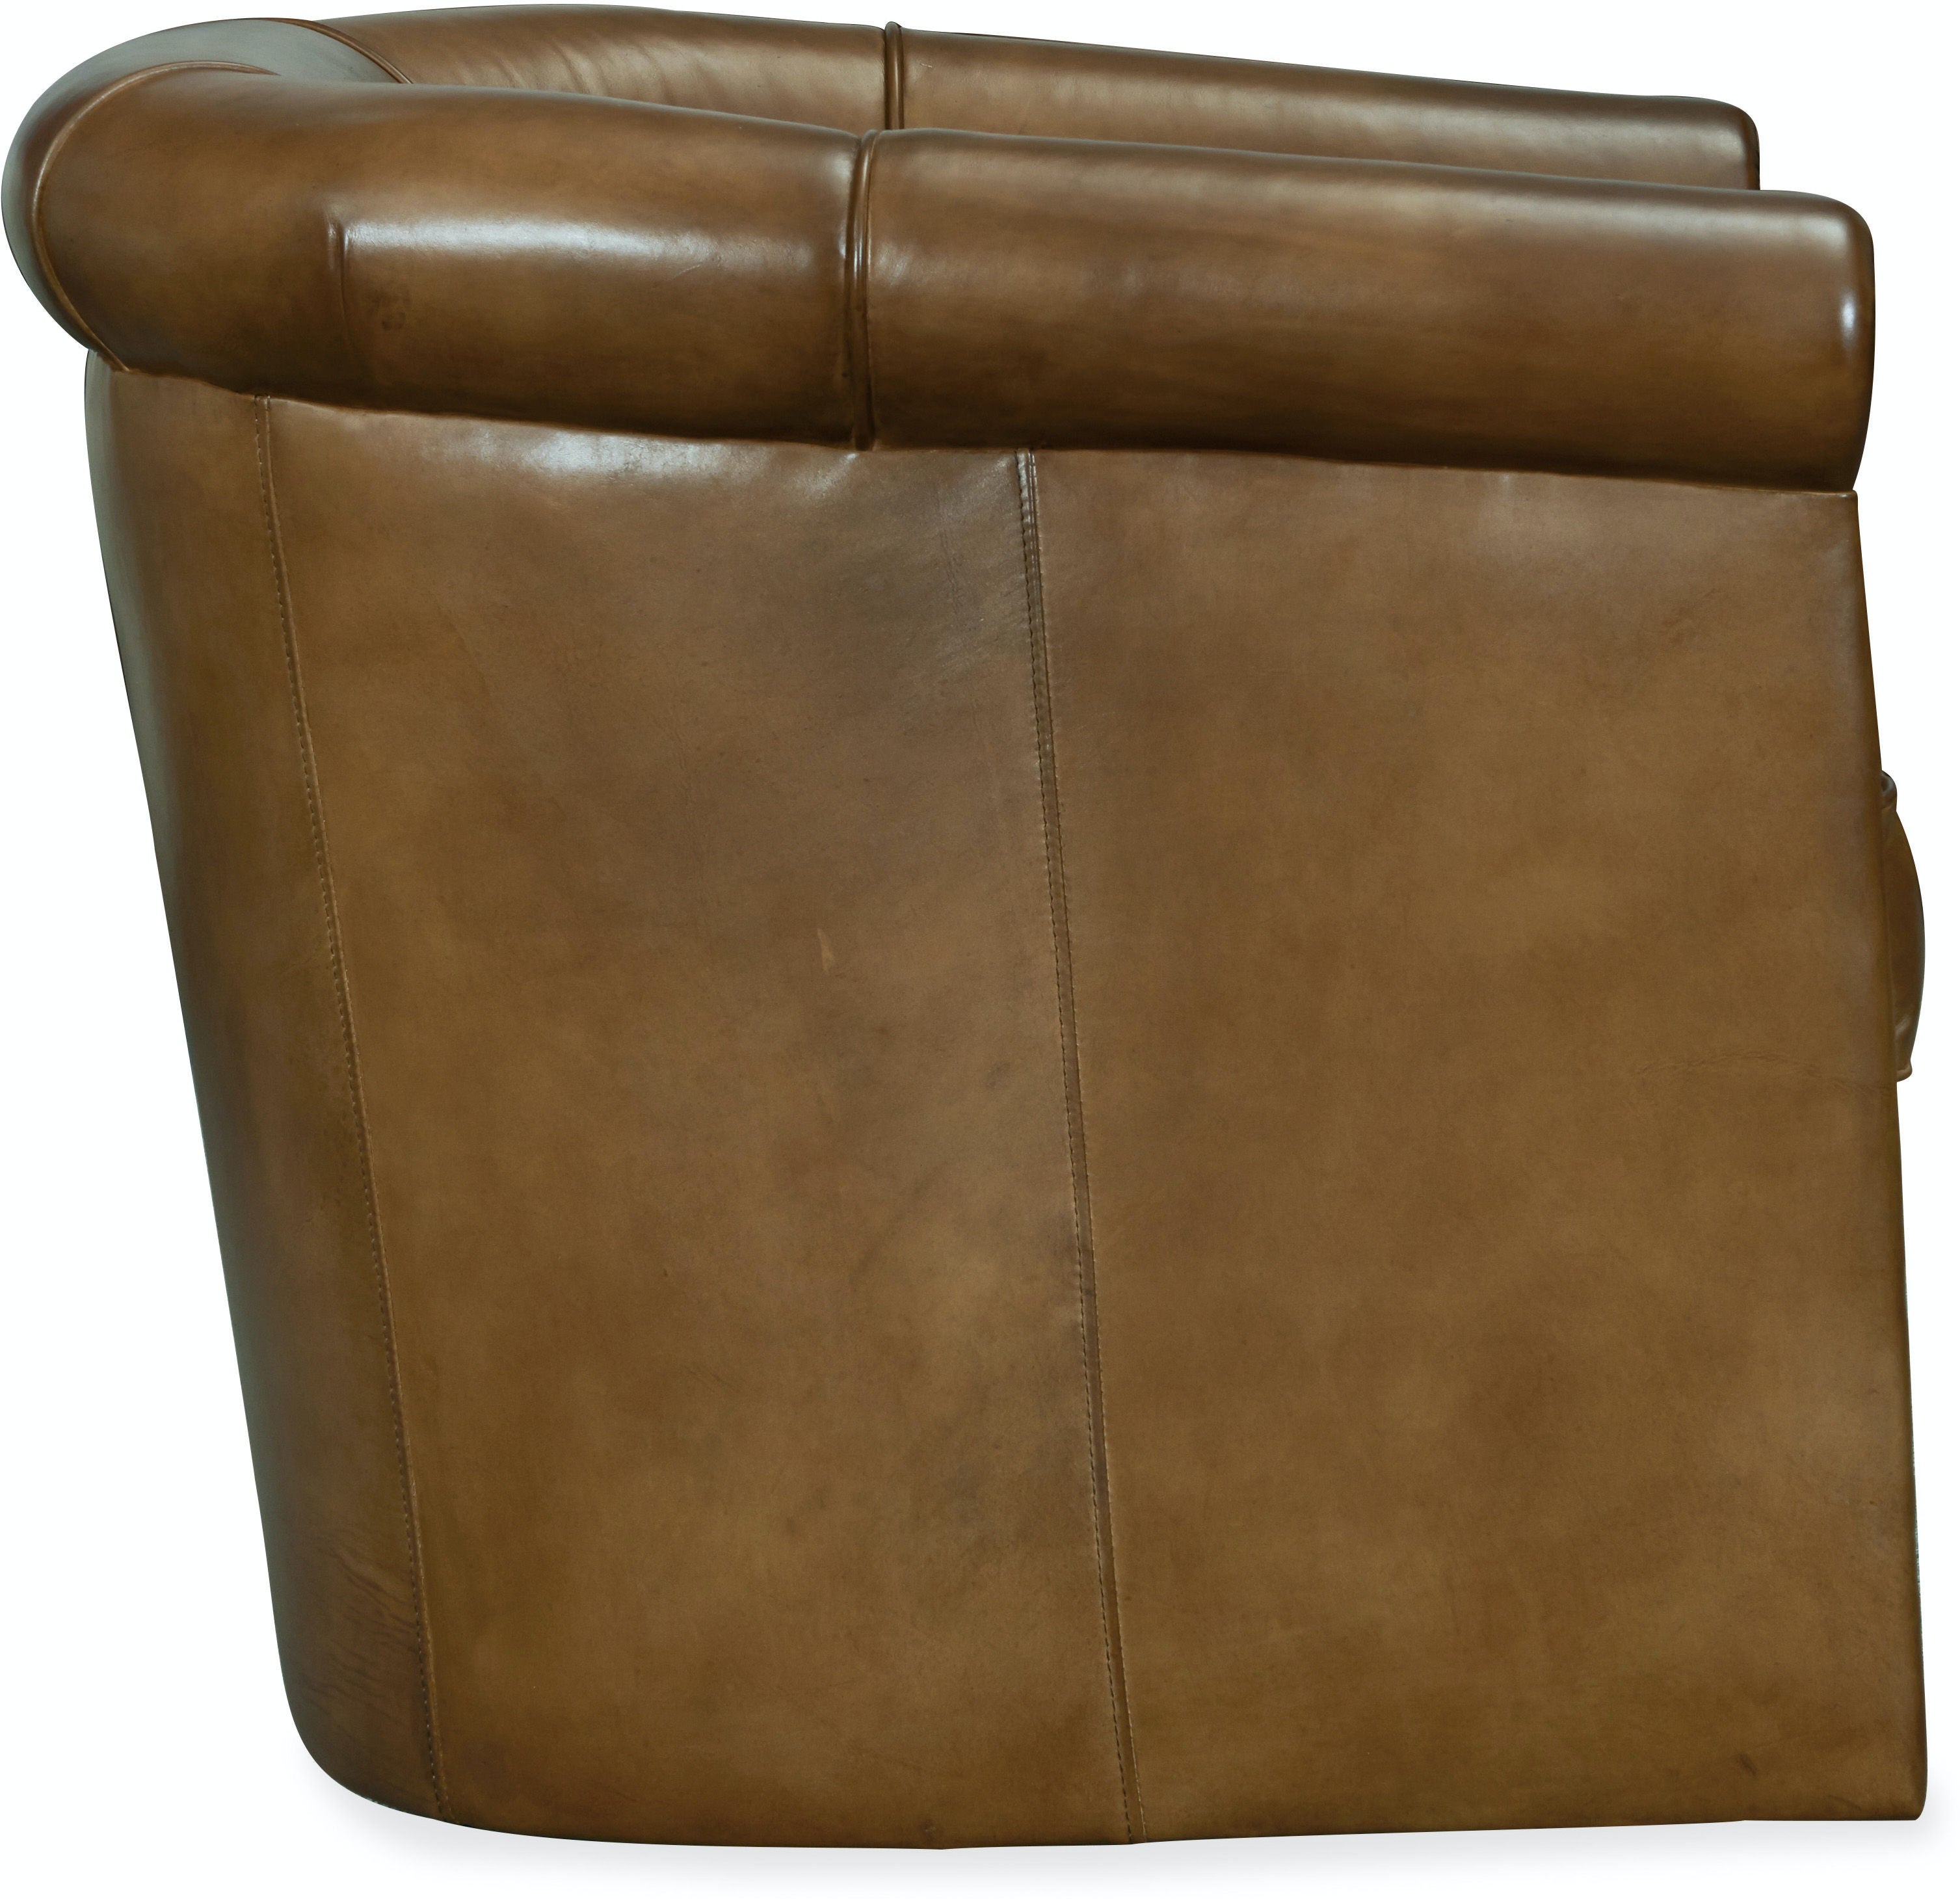 Hooker Furniture Leather Club Chair